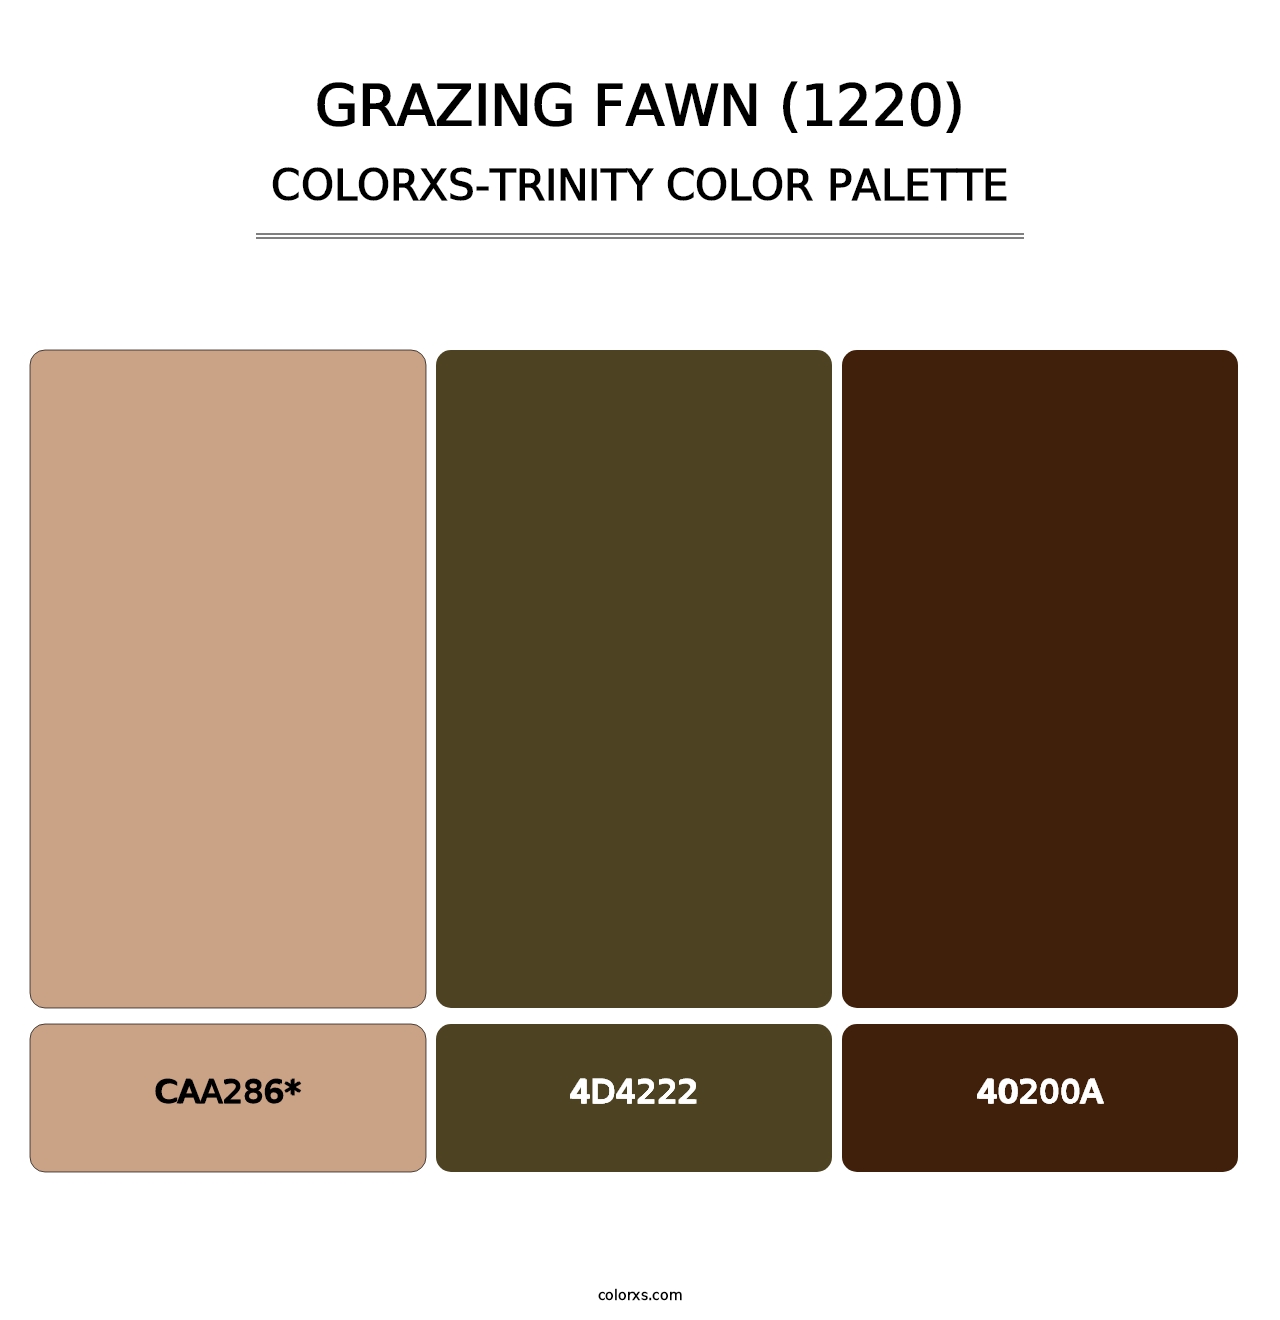 Grazing Fawn (1220) - Colorxs Trinity Palette